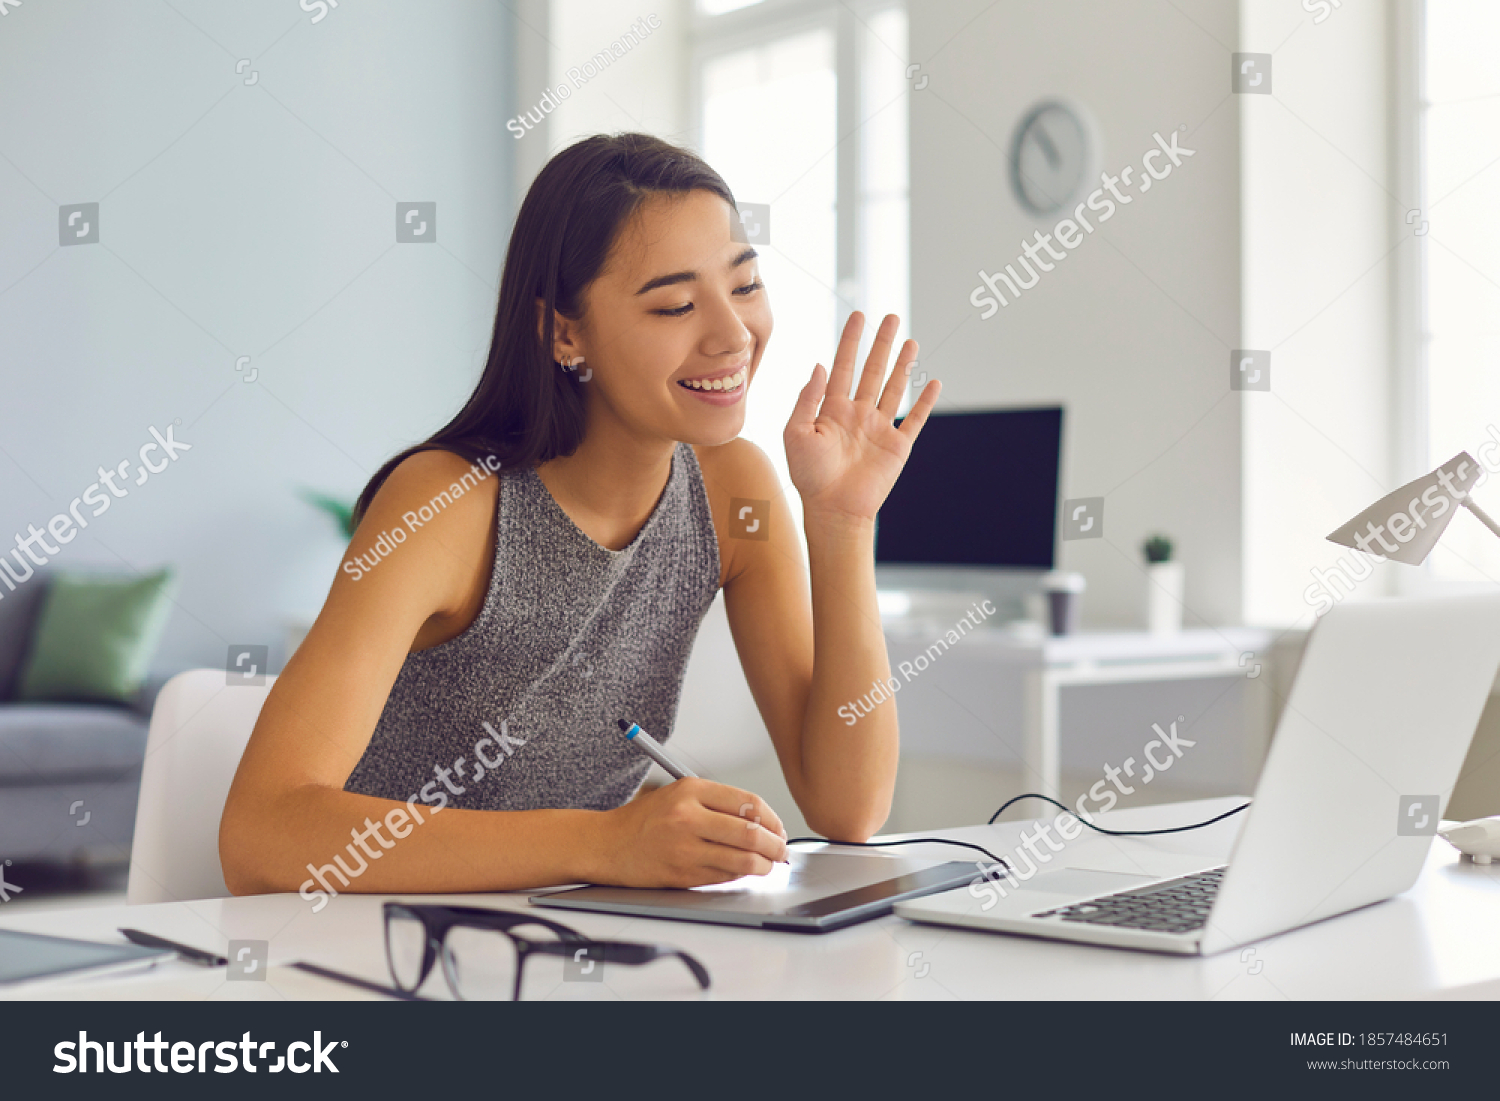 Smiling creative young digital artist girl with graphic tablet and pen waving hand at laptop computer, meeting client online from home office and painting or drawing sketch portrait via video call app #1857484651